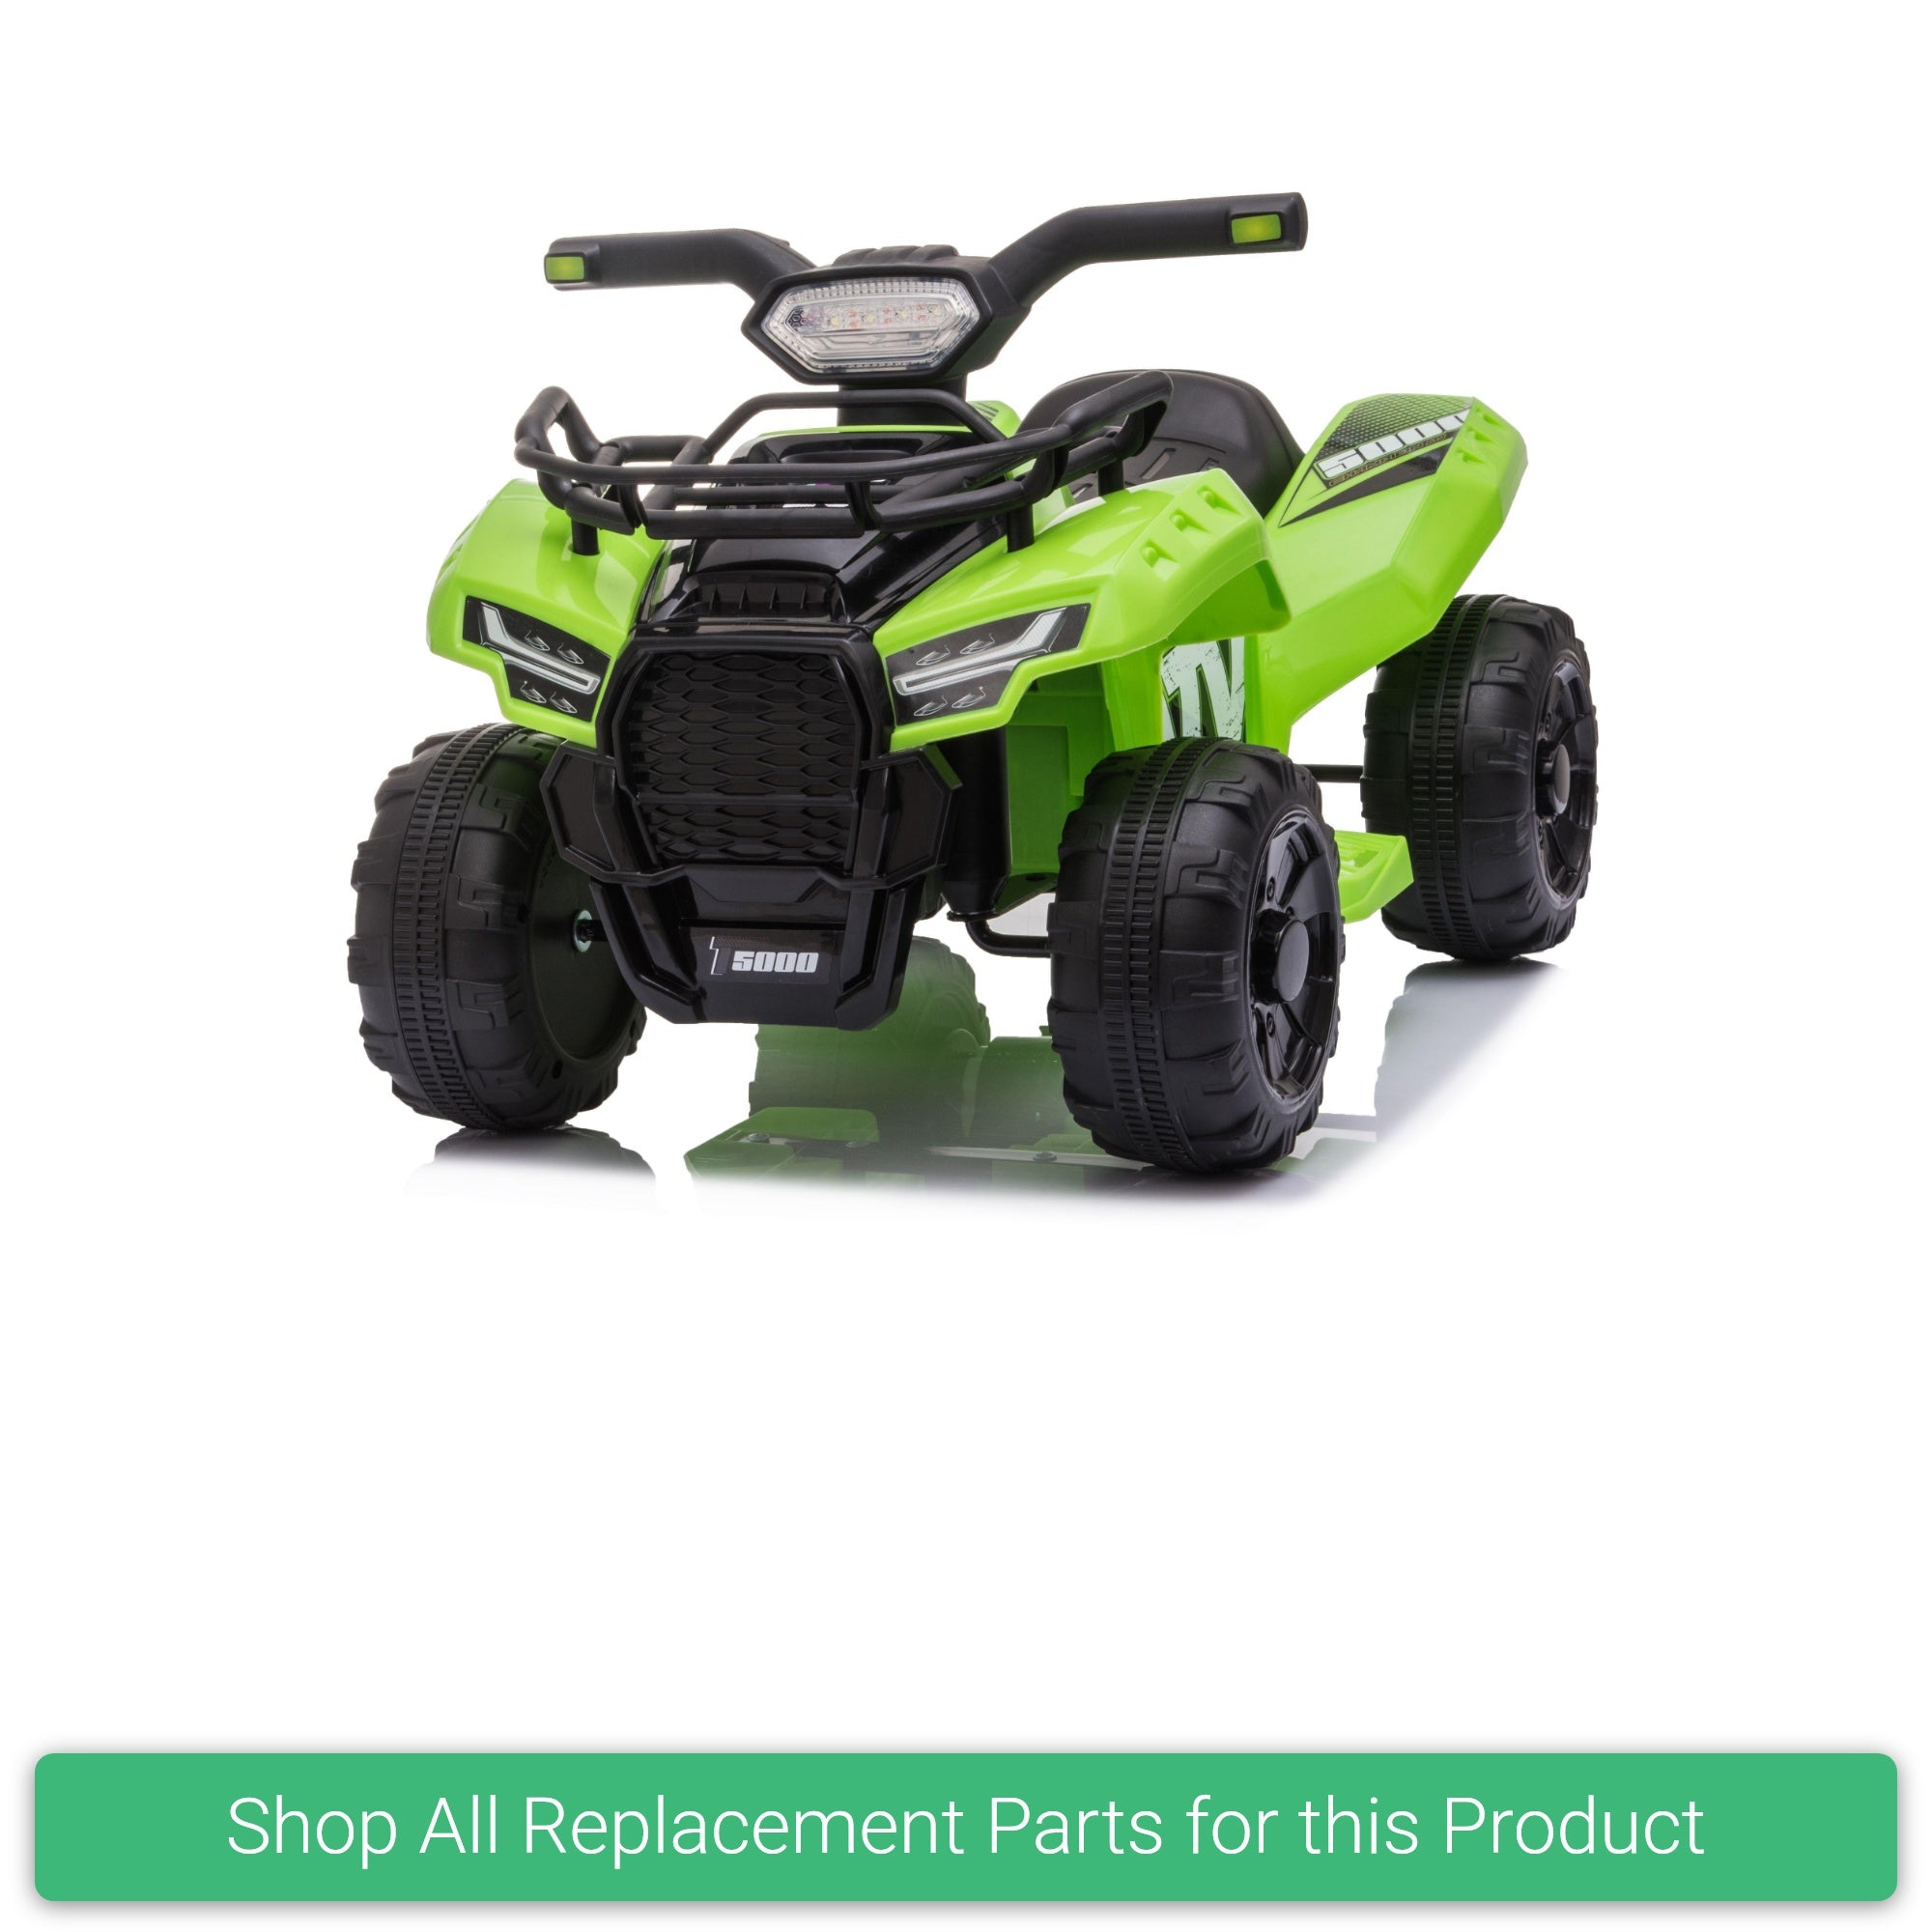 Replacement Parts and Spares for Kids 6v ATV 2021 Model - 320-ATV-VARI - JS320